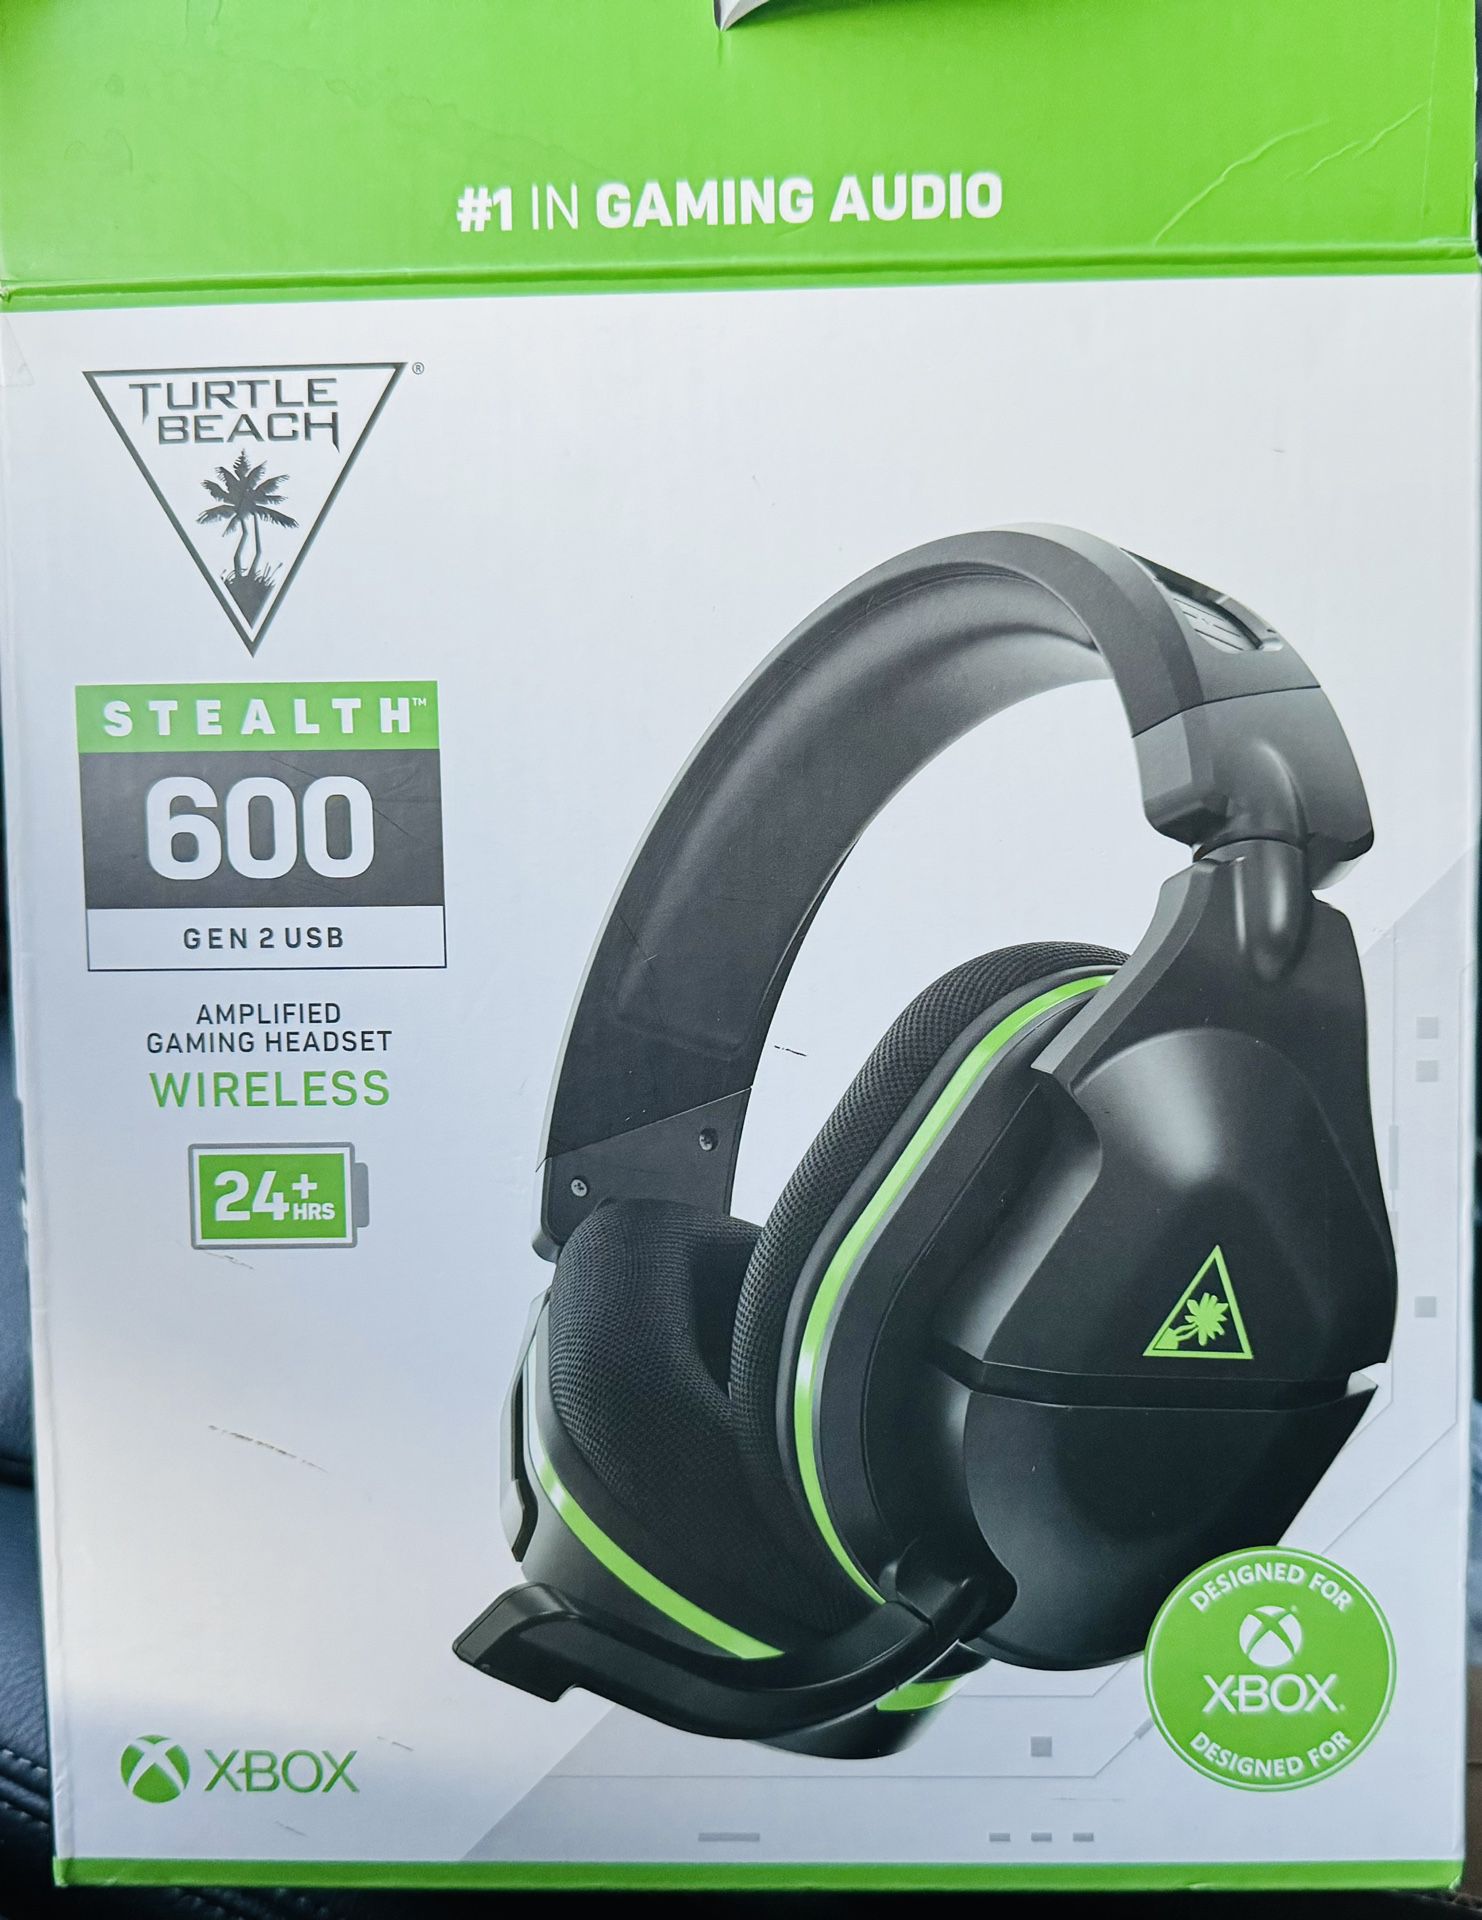 Turtle Beach Gaming Headset Designed For XBOX Platforms: STEALTH 600 GEN 2 USB AMPLIFIED GAMING HEADSET_!!!WIRELESS!!!